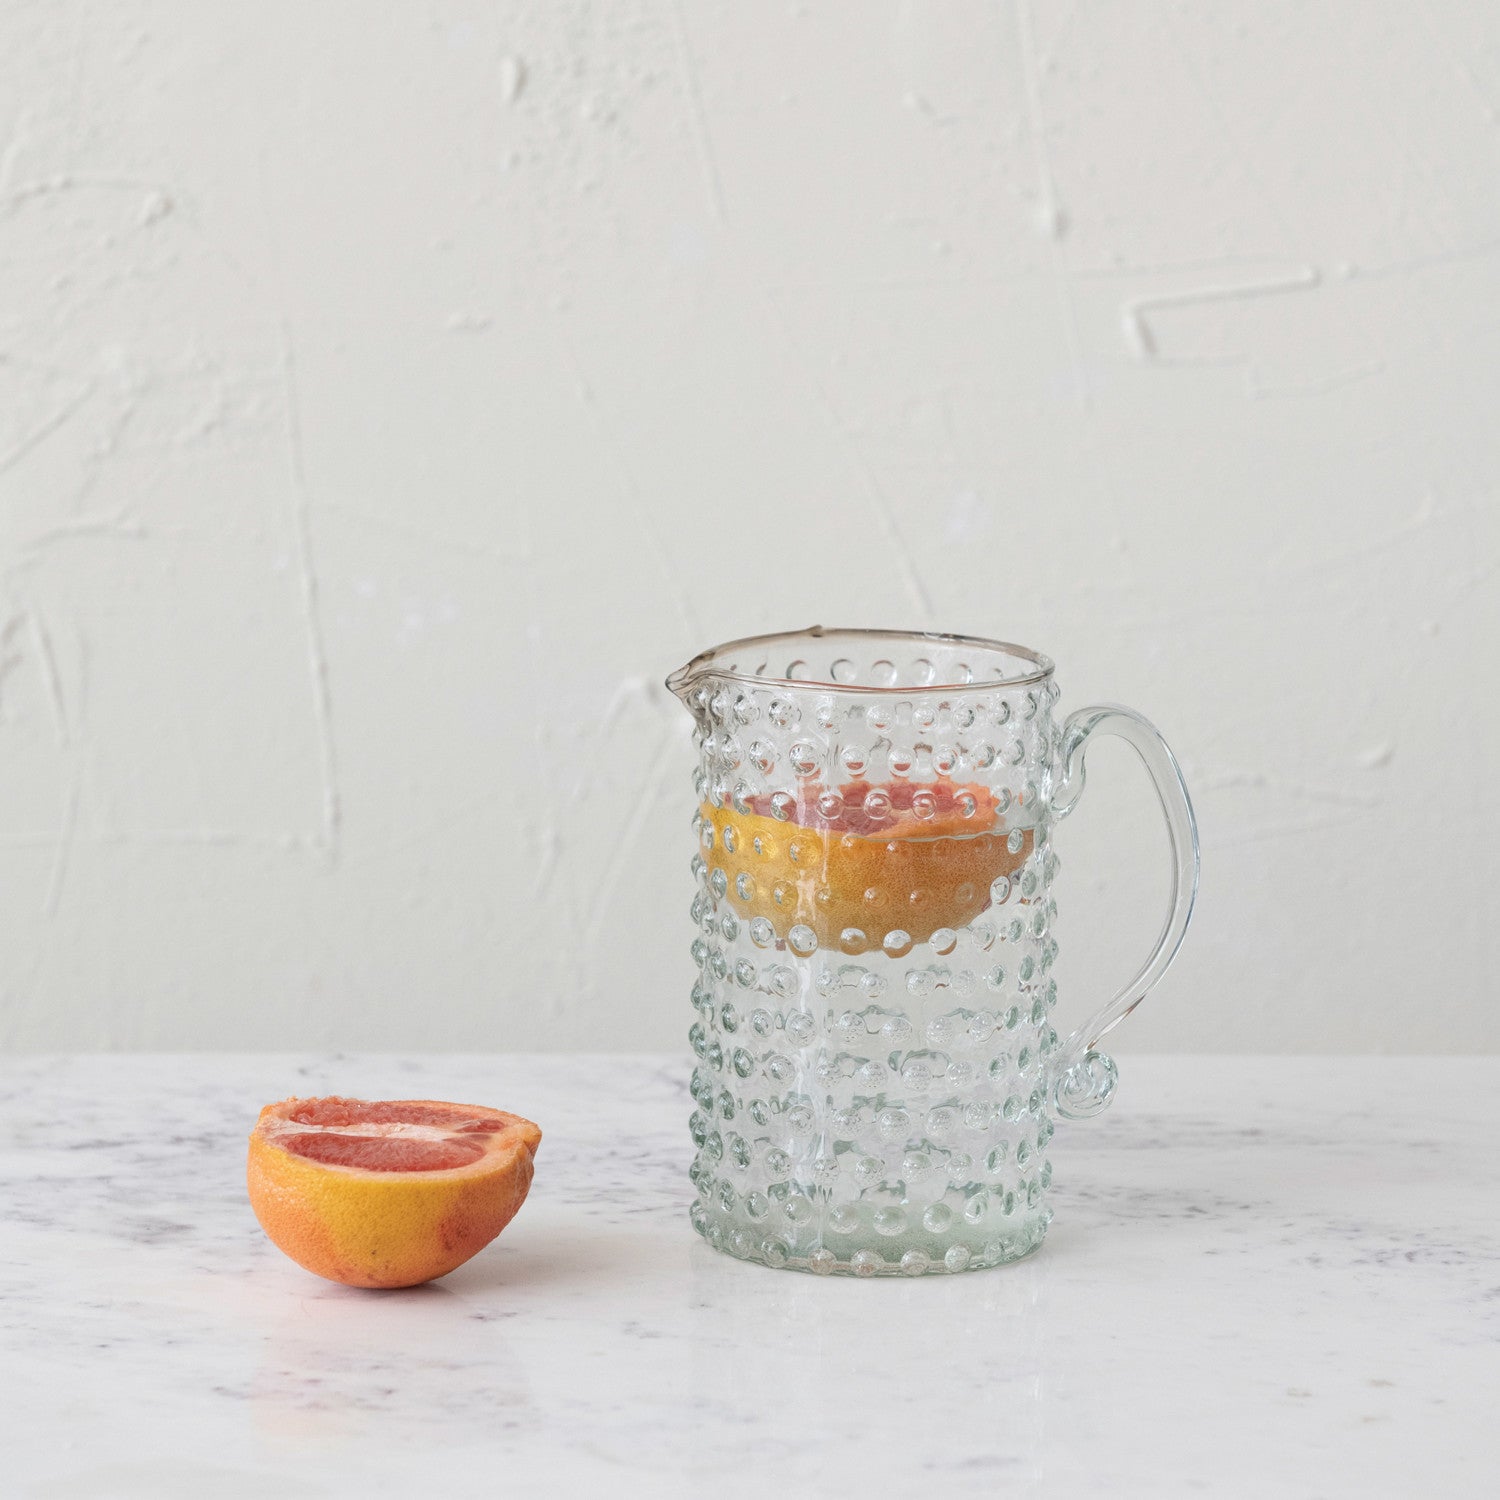 Hand-Blown Glass Hobnail Pitcher - Favorite Little Things Co